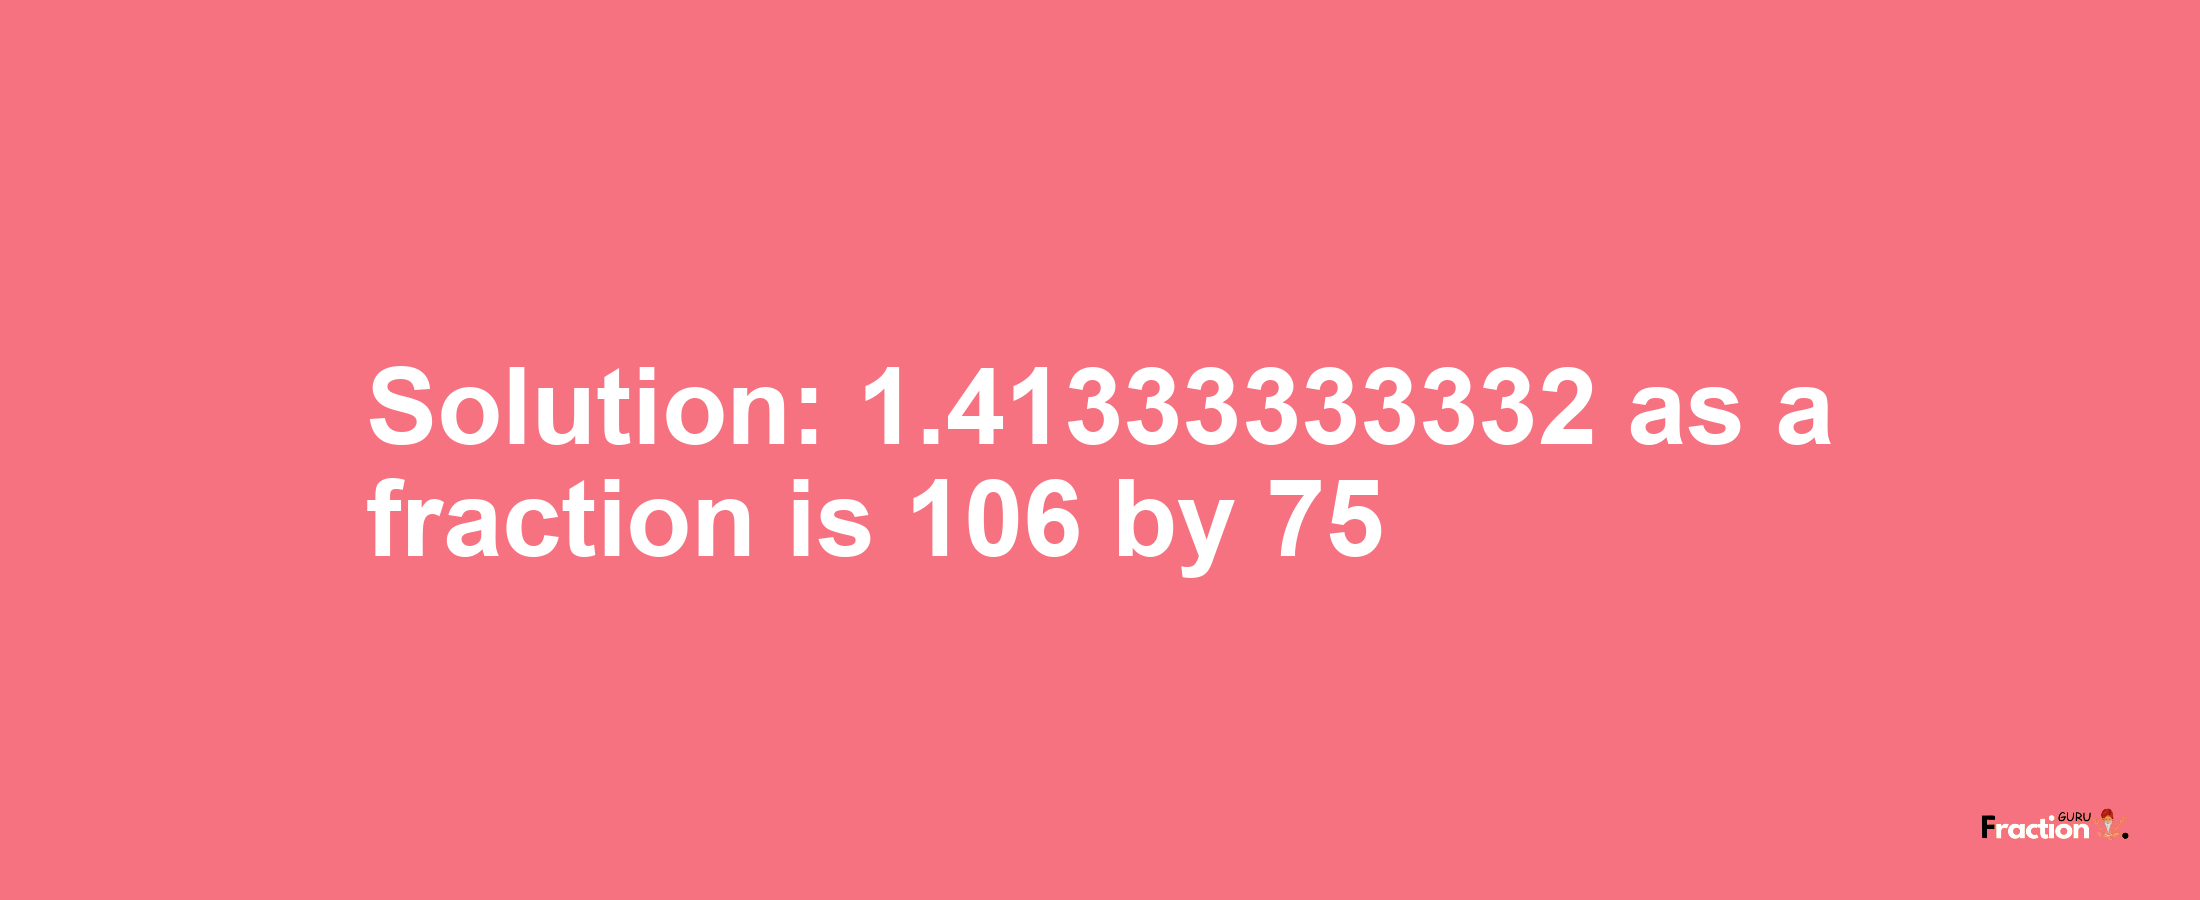 Solution:1.41333333332 as a fraction is 106/75